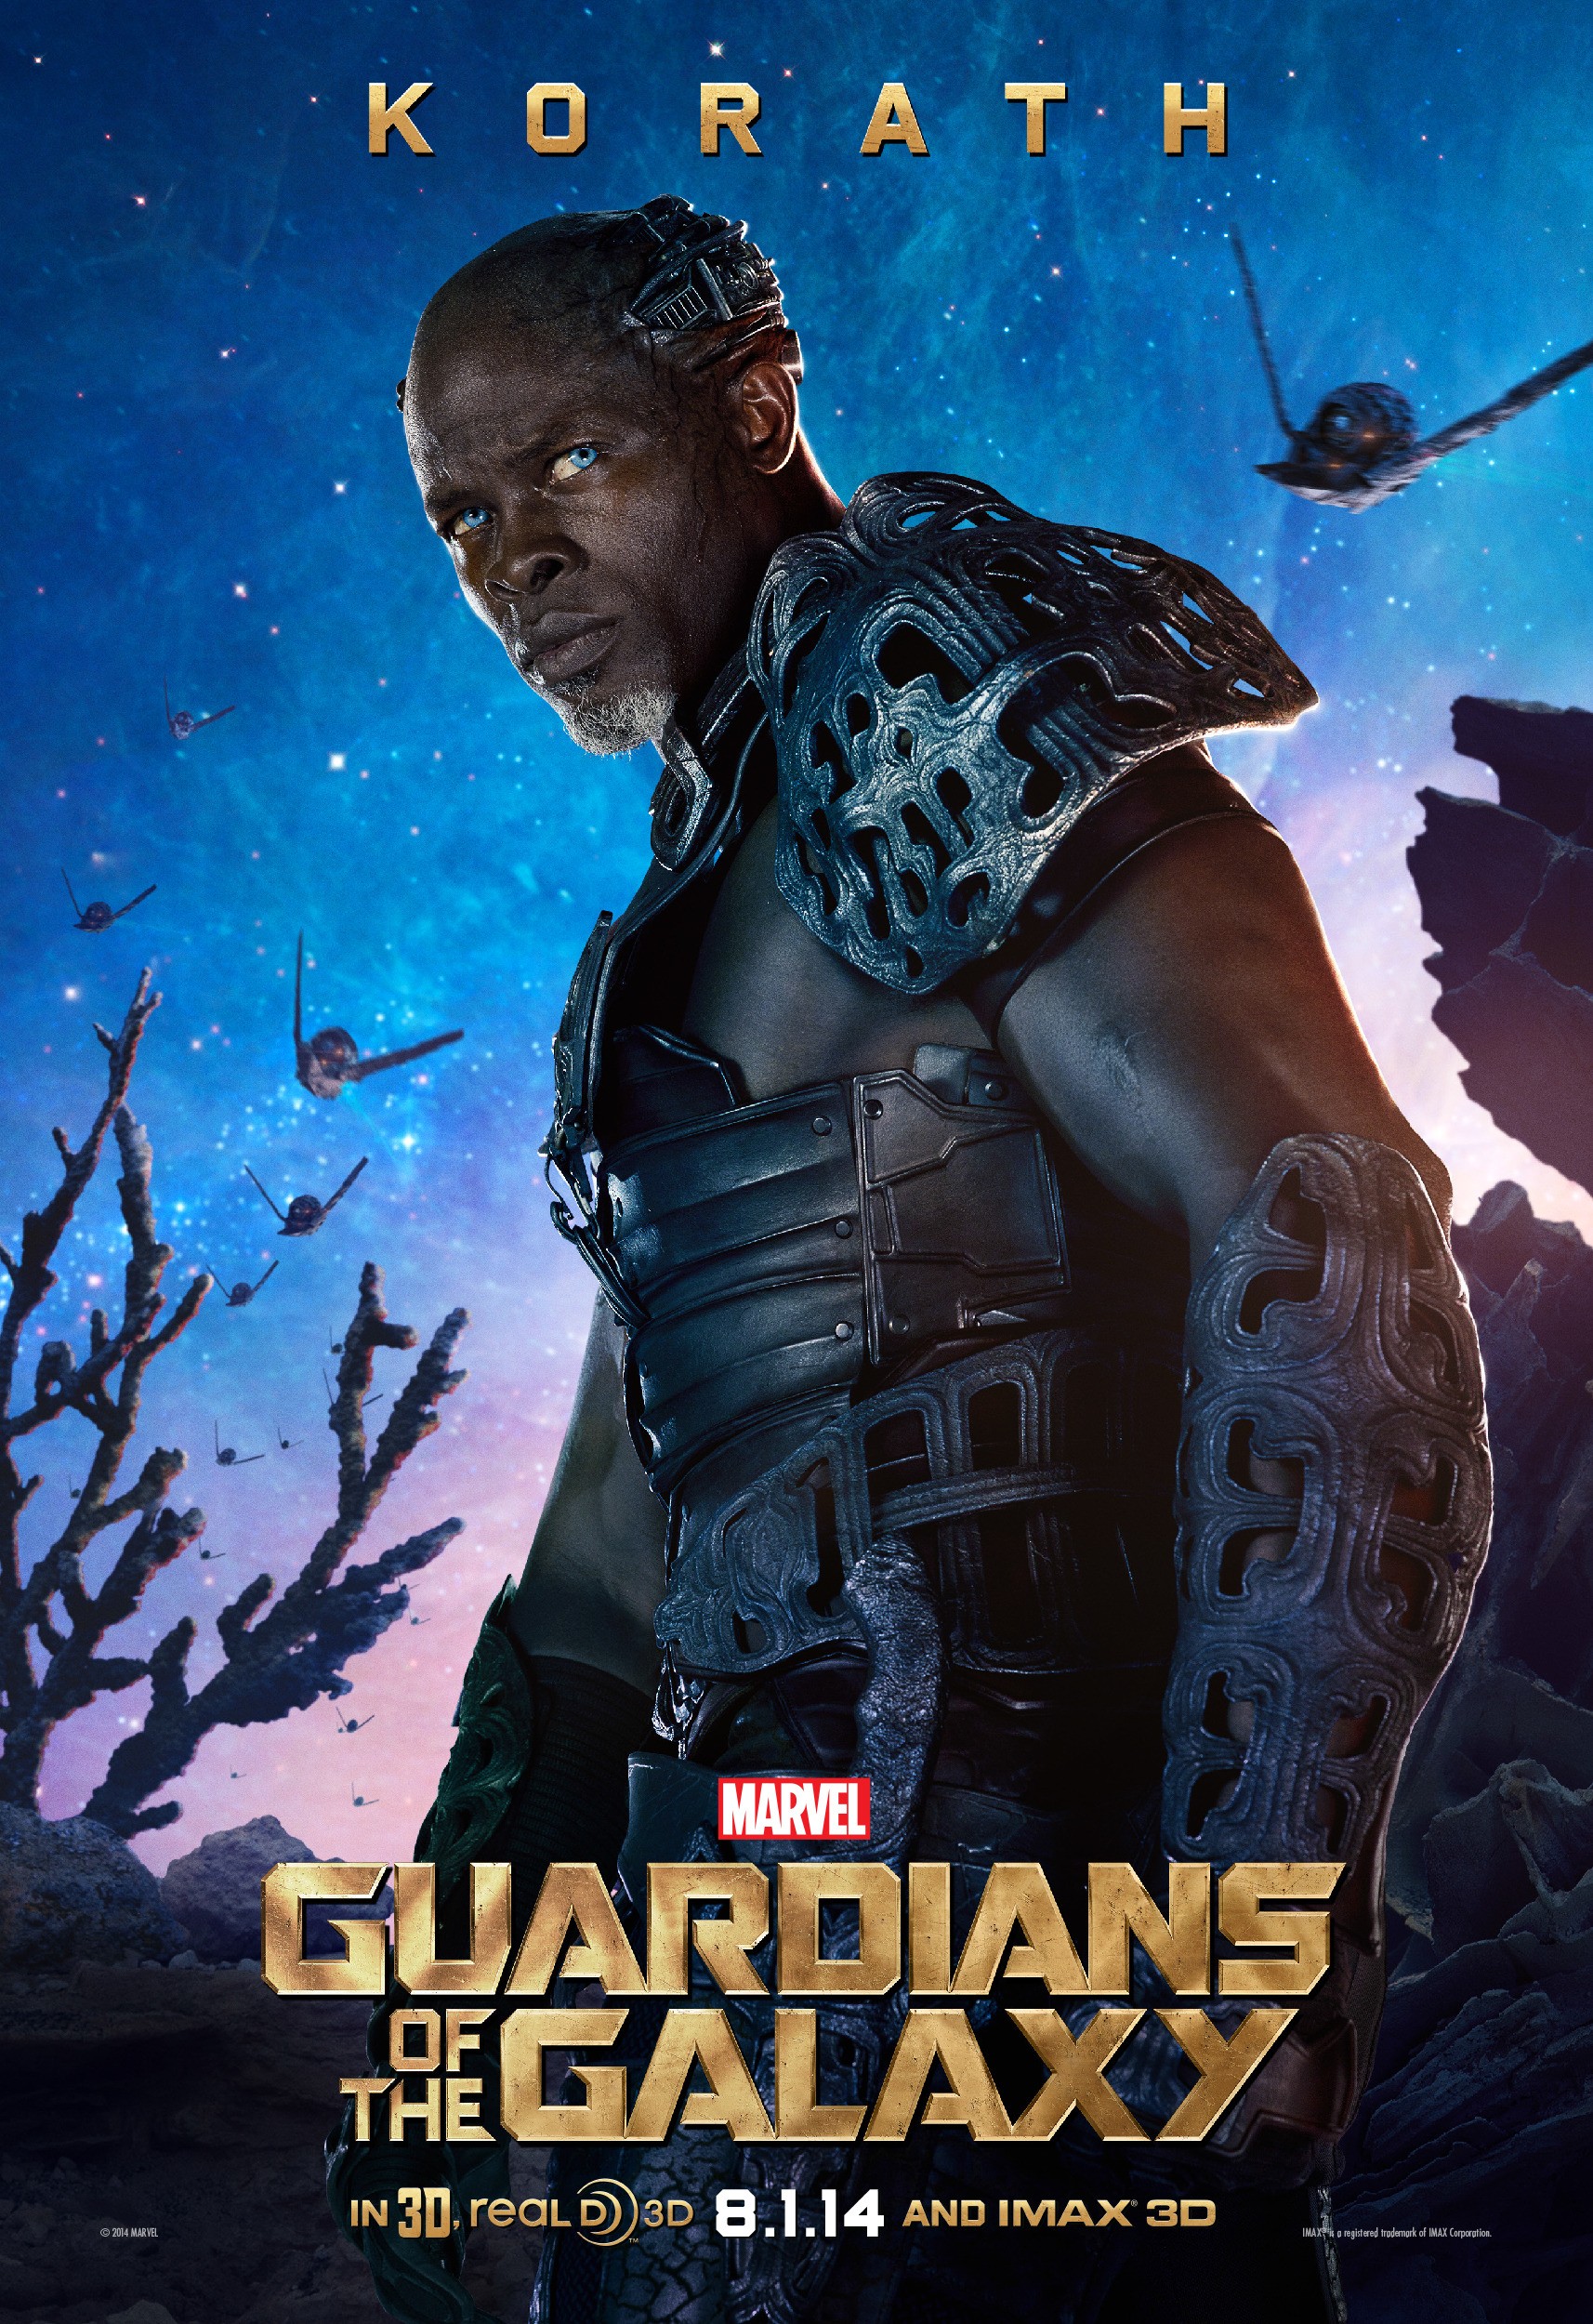 Mega Sized Movie Poster Image for Guardians of the Galaxy (#17 of 23)